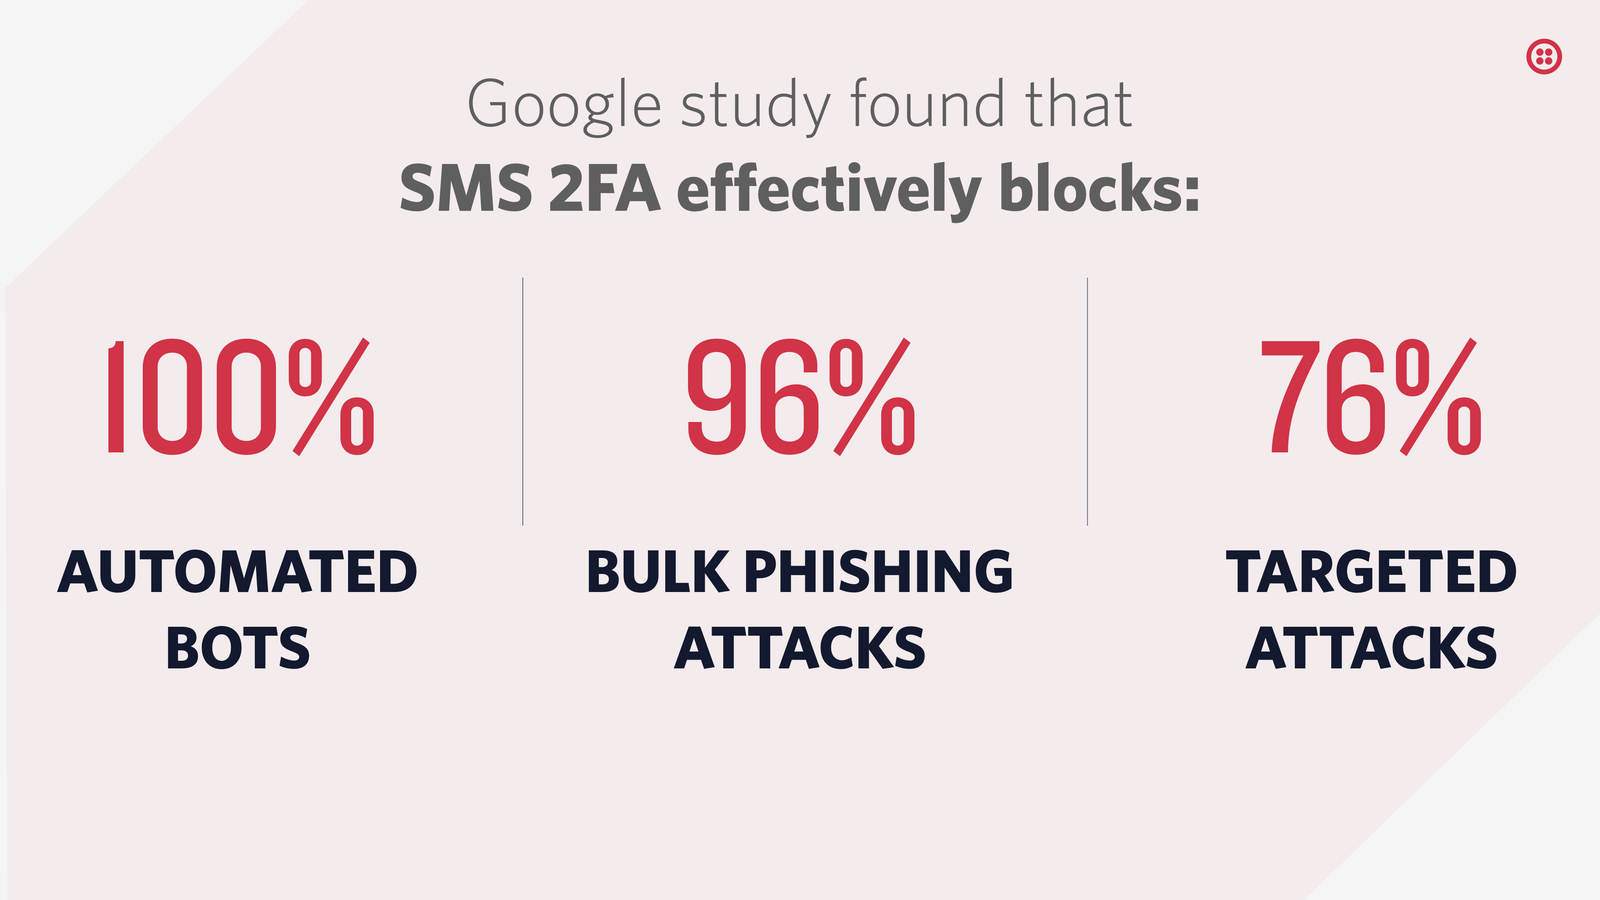 google study found that SMS 2FA effectively blocks 100% of automated bots, 96% of bulk phishing attacks, and 76% of targeted attacks.